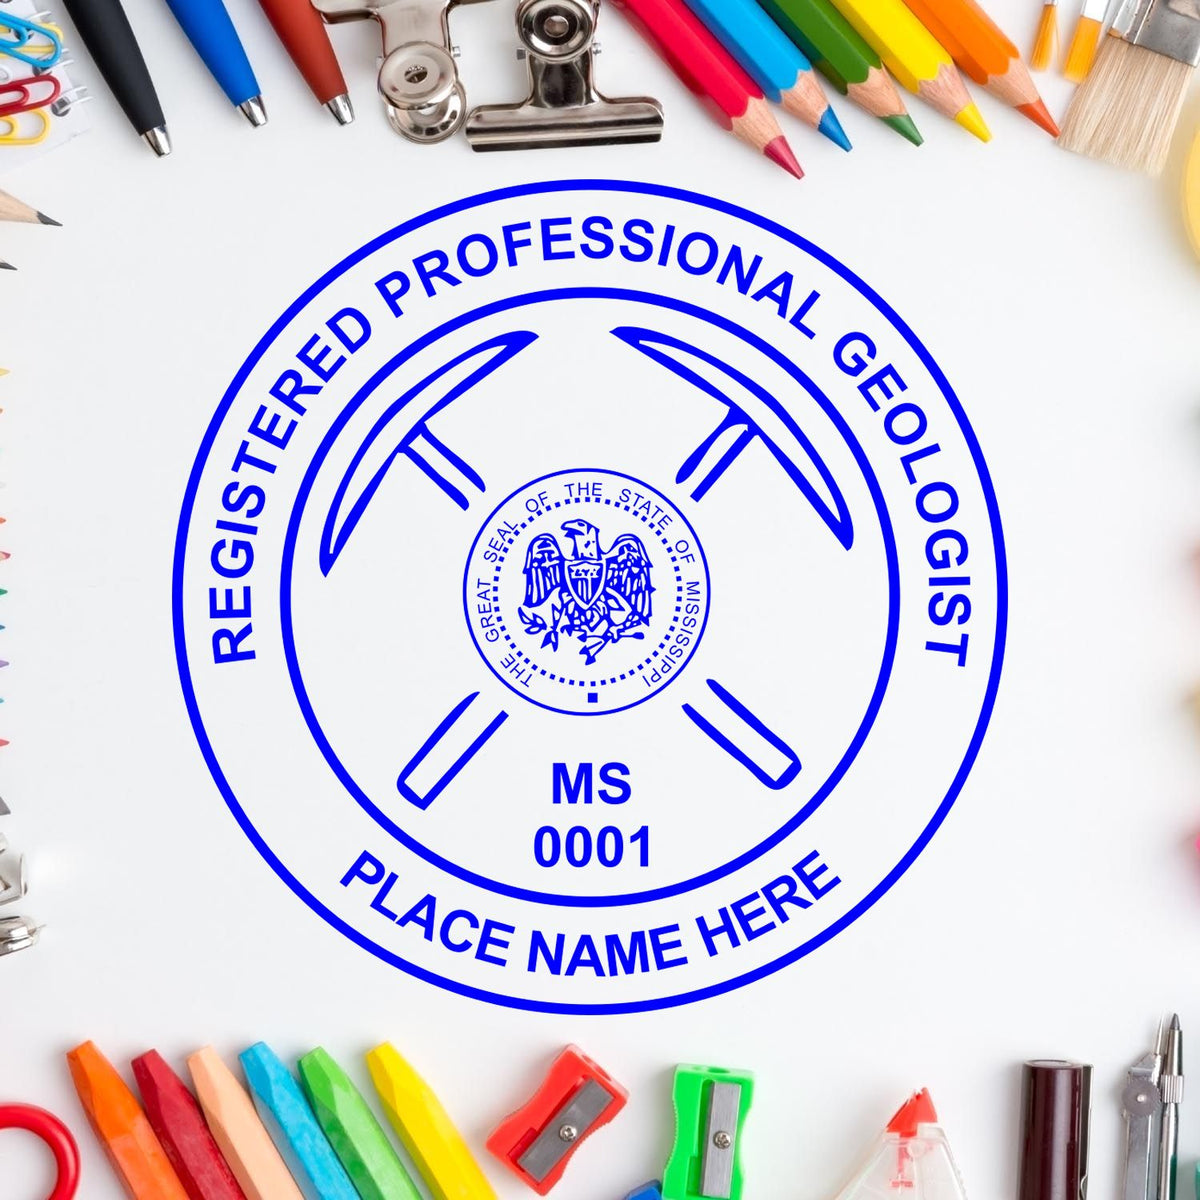 The Slim Pre-Inked Mississippi Professional Geologist Seal Stamp stamp impression comes to life with a crisp, detailed image stamped on paper - showcasing true professional quality.